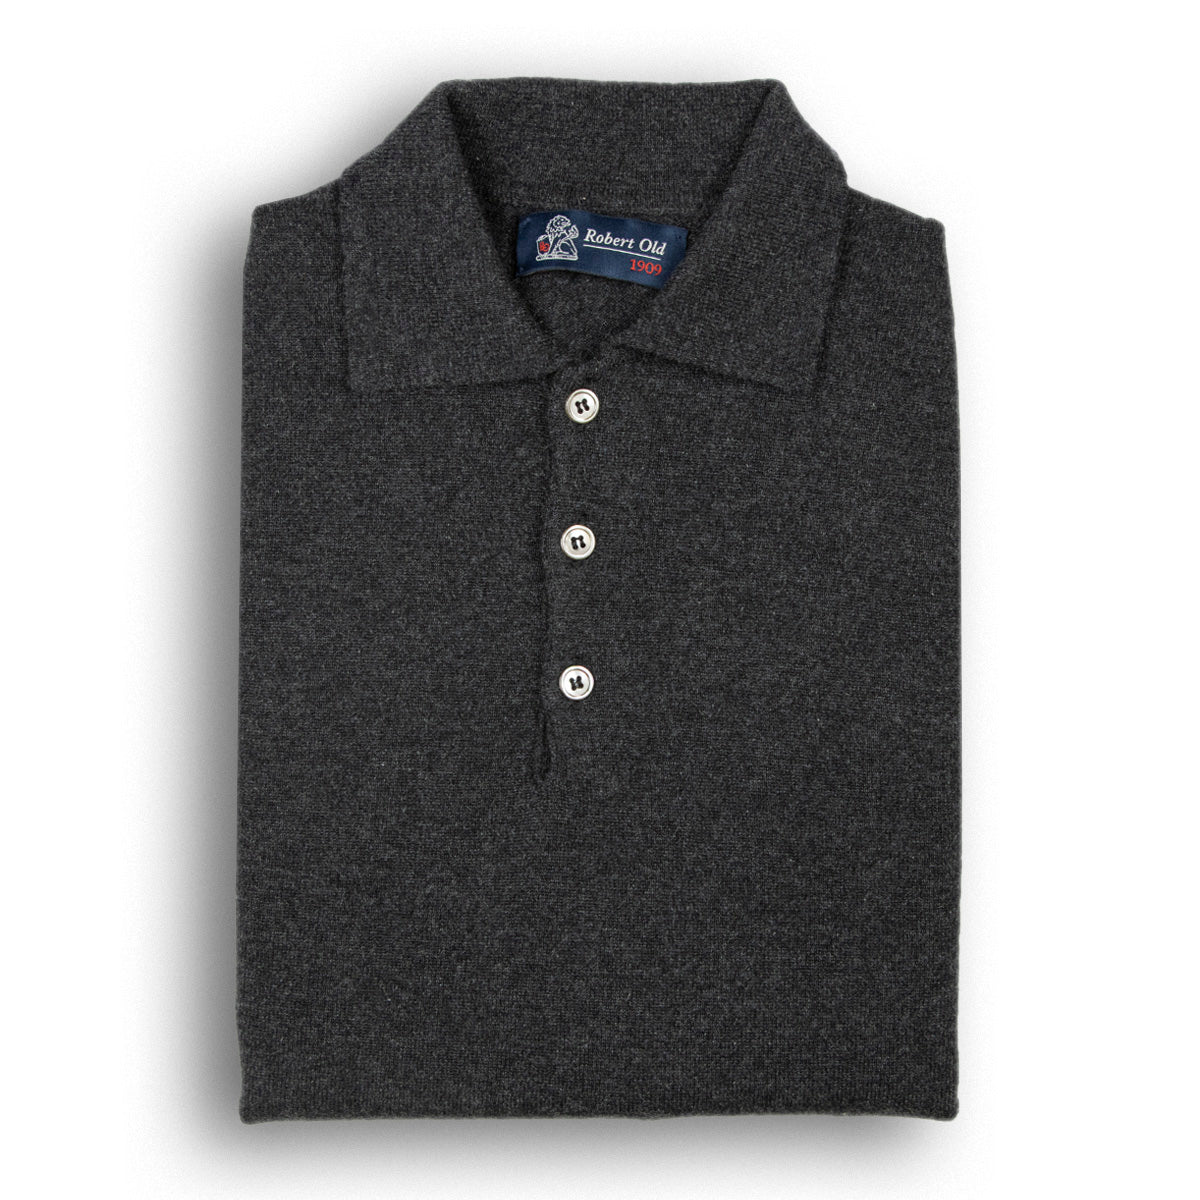 Charcoal Oban 3 button 2ply Cashmere Polo Sweater  Robert Old Charcoal UK 36" 